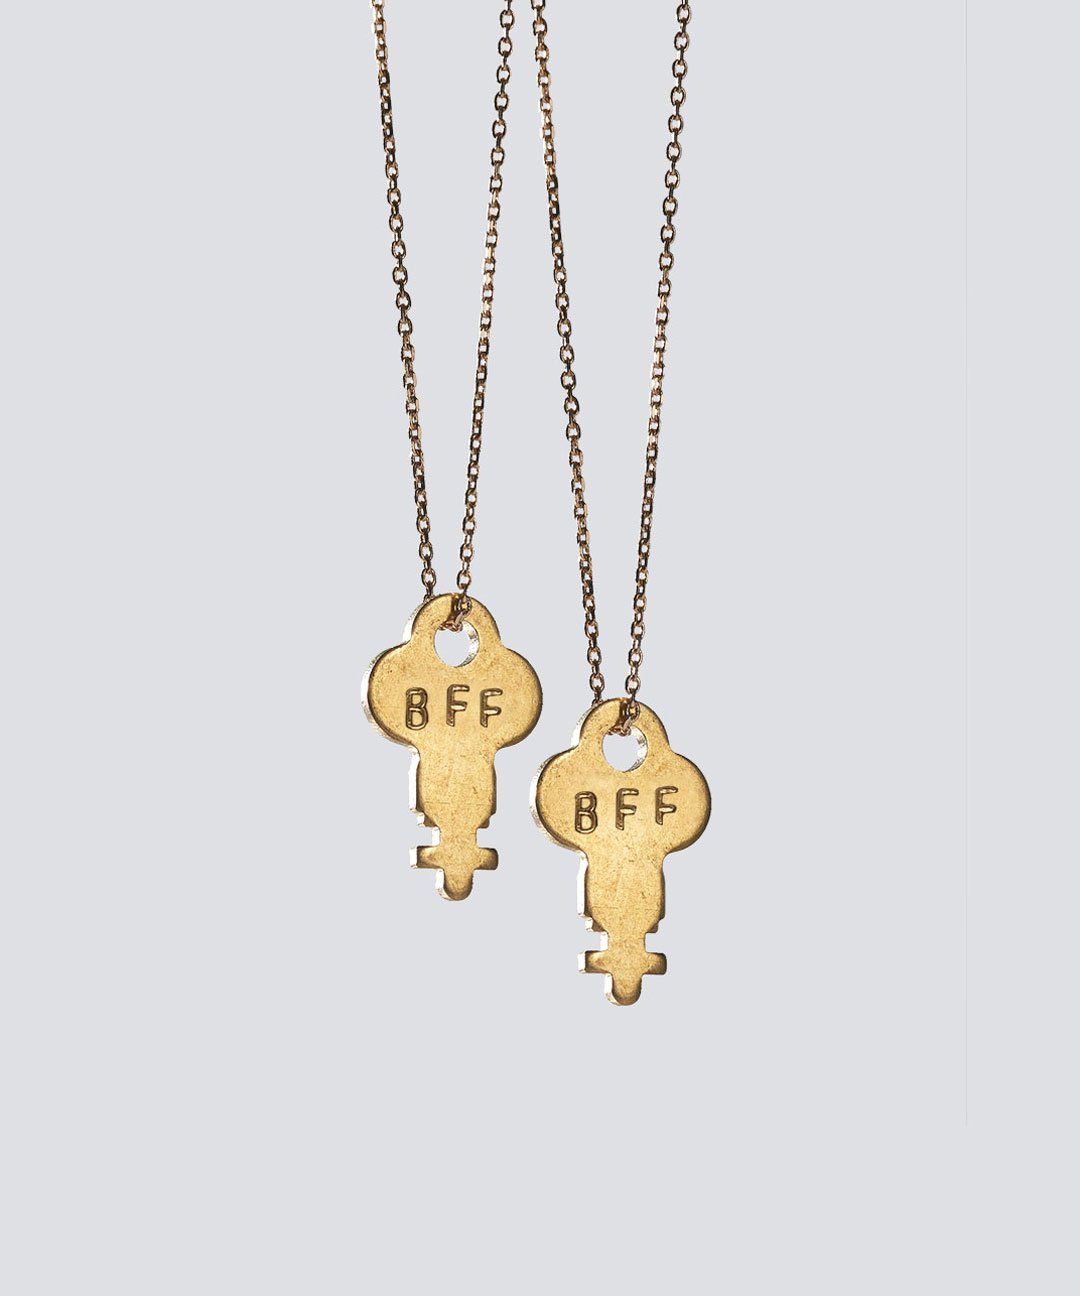 Best Friends Gold Dainty Key Necklace Set Necklaces The Giving Keys BFF GOLD 